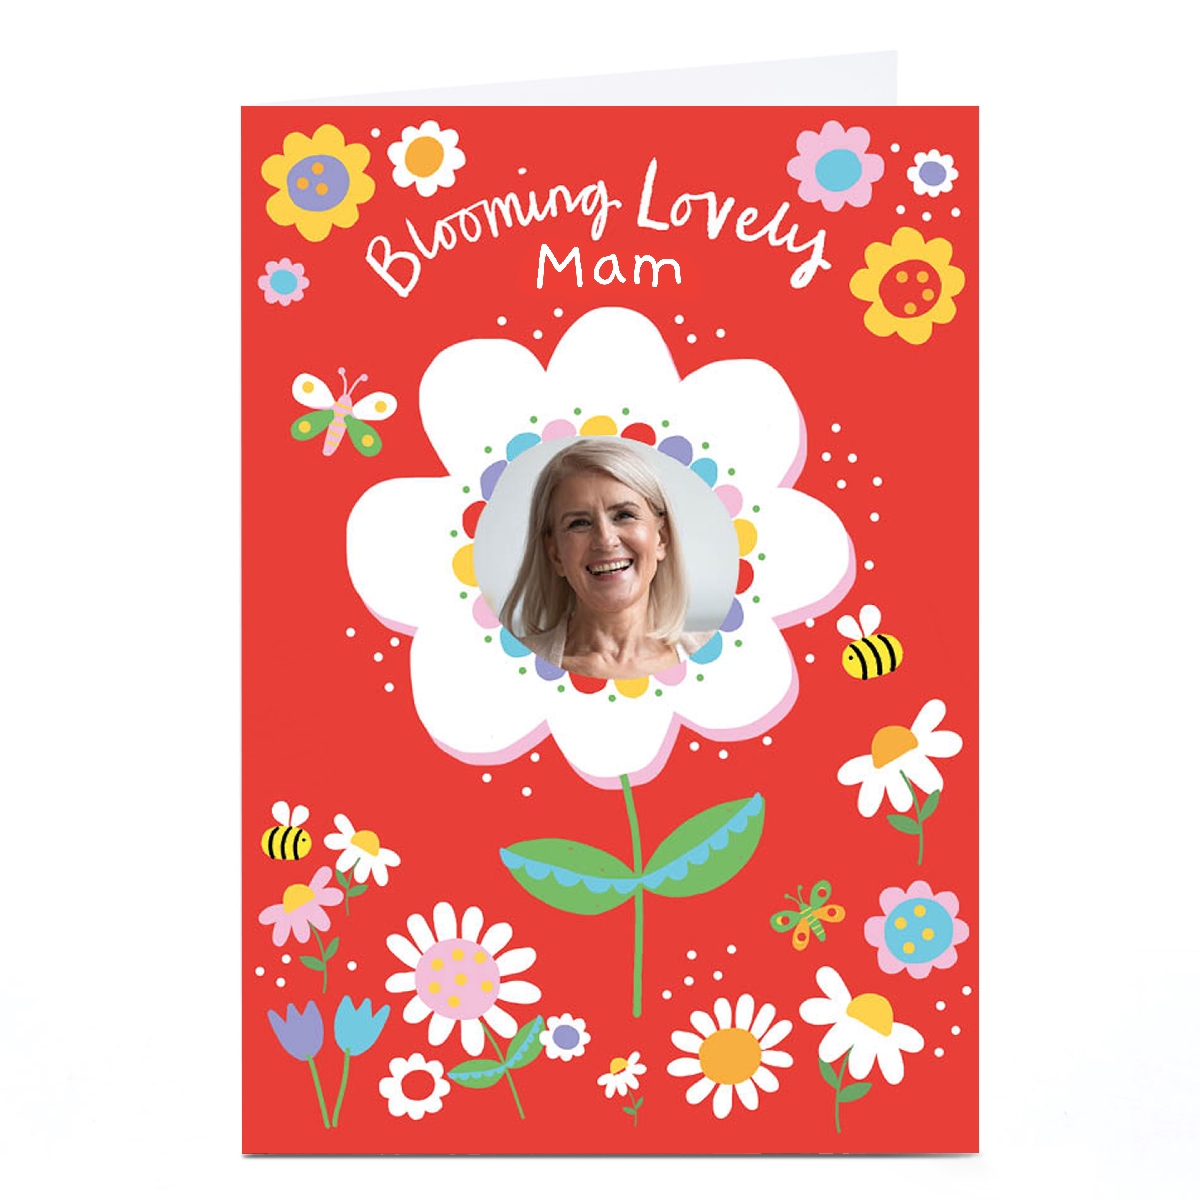 Personalised Lindsay Kirby Mother's Day Card - Blooming Lovely Mam